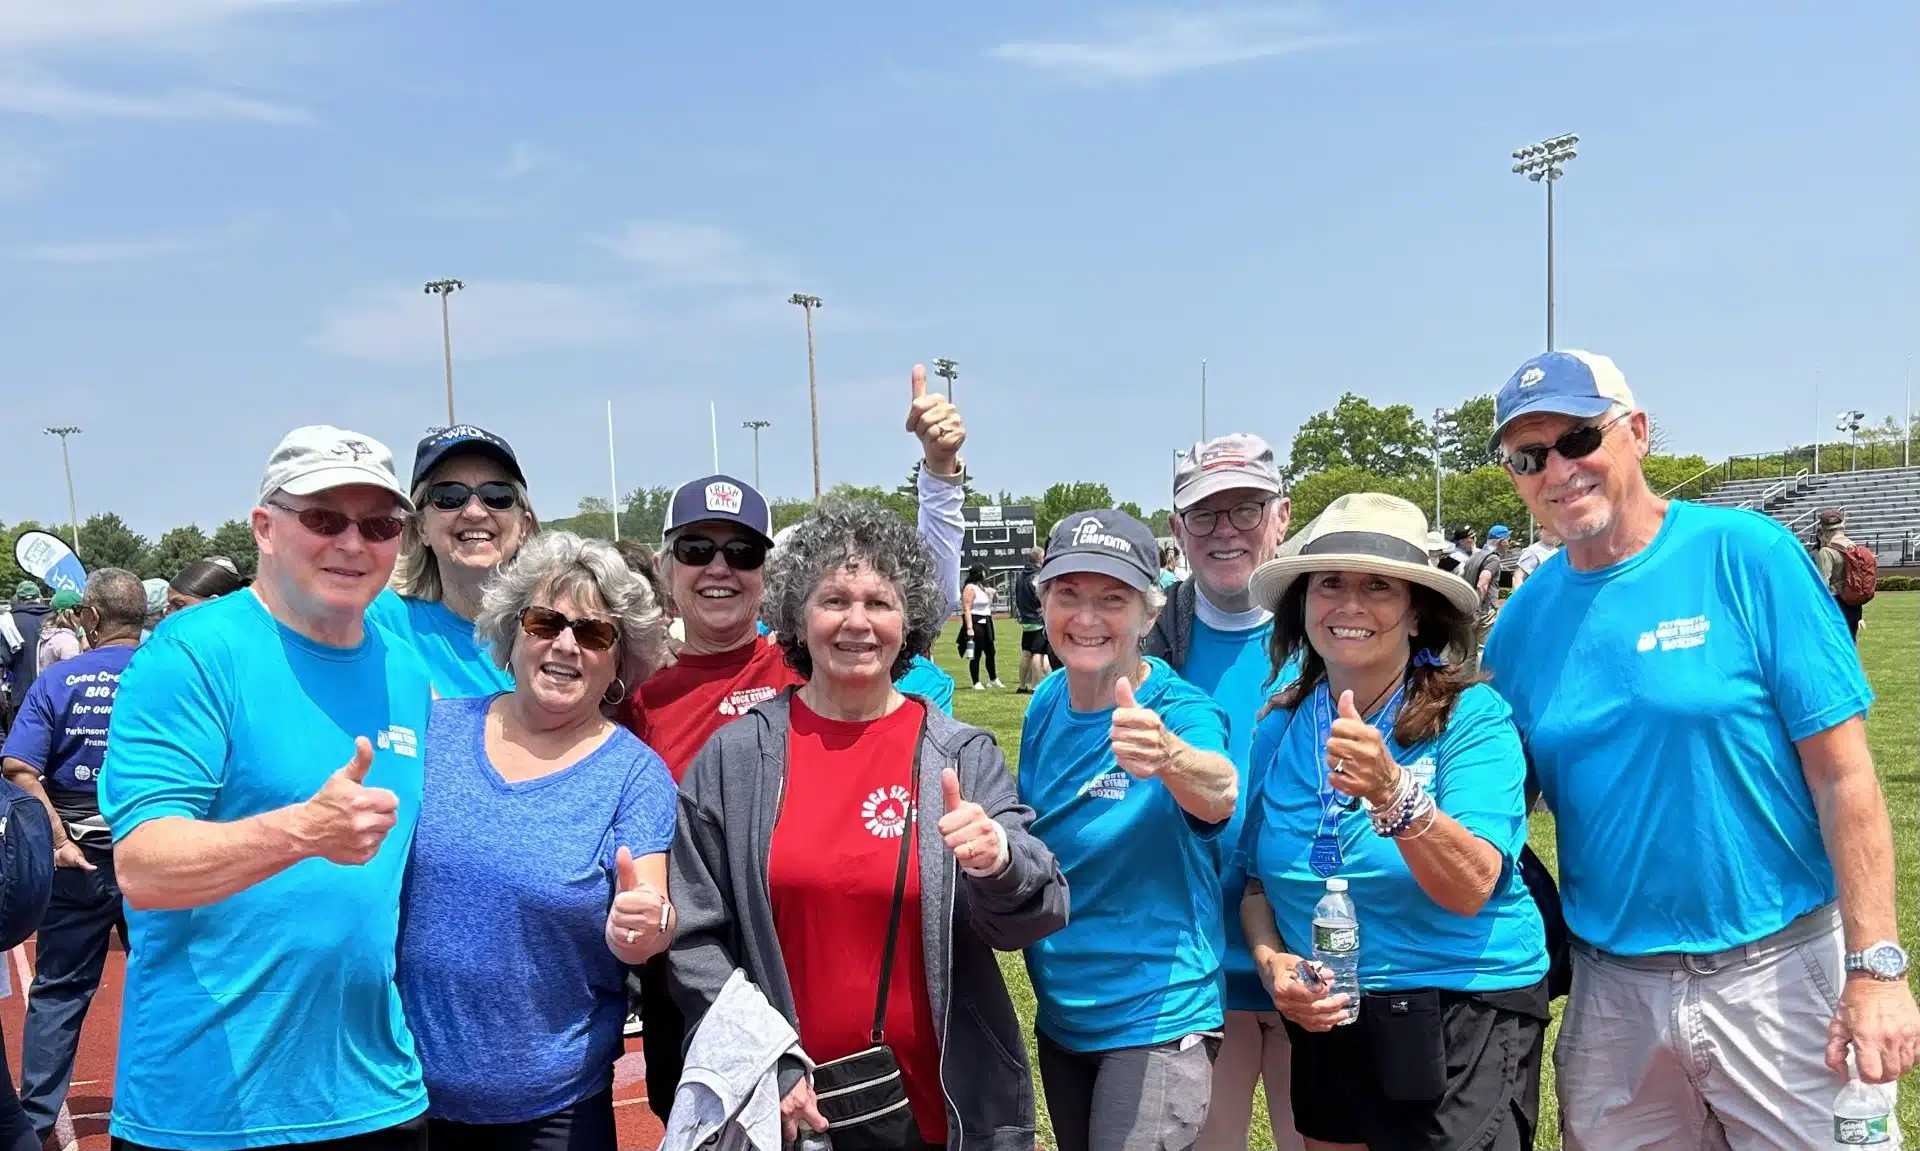 Walk participants have big smiles and give a big thumbs up on a sunny day.